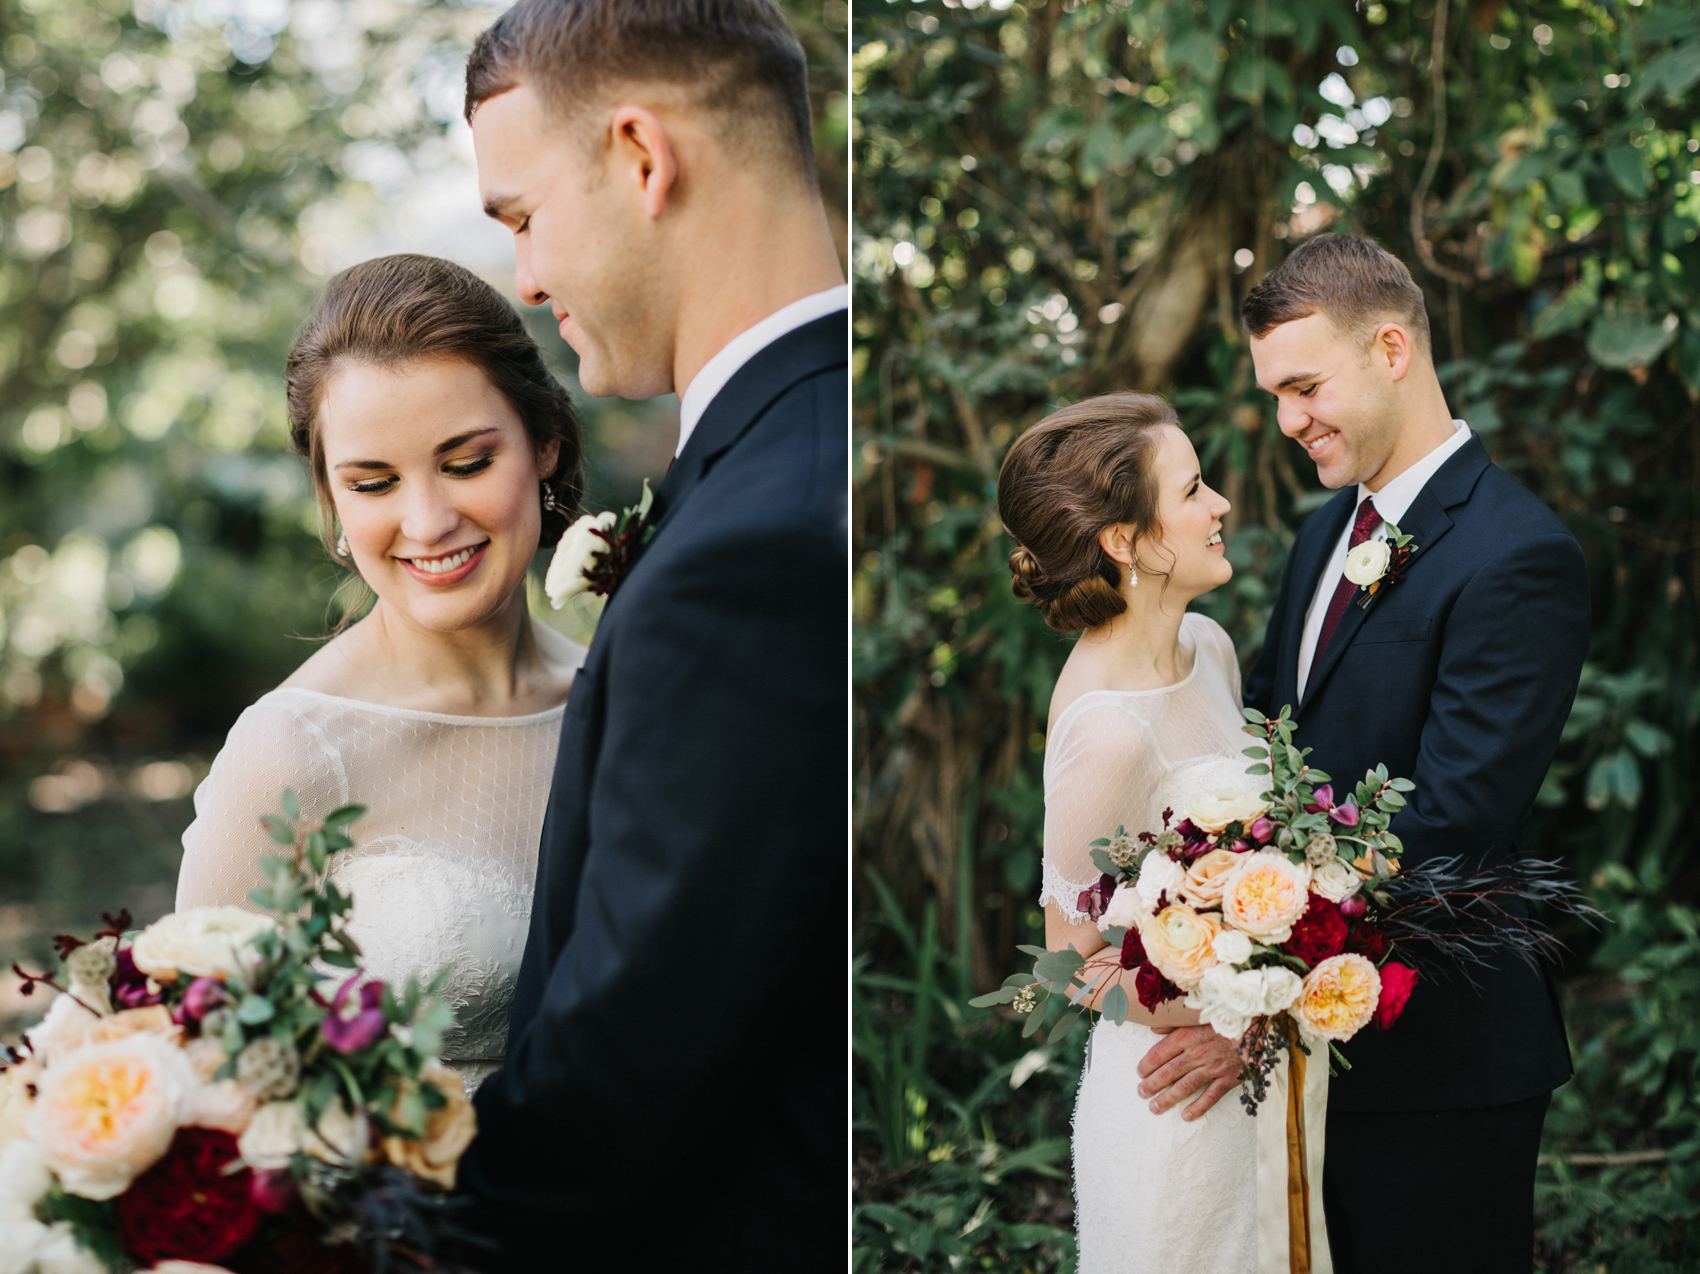 The bride and groom share a first look in the garden before the Vero beach wedding ceremony